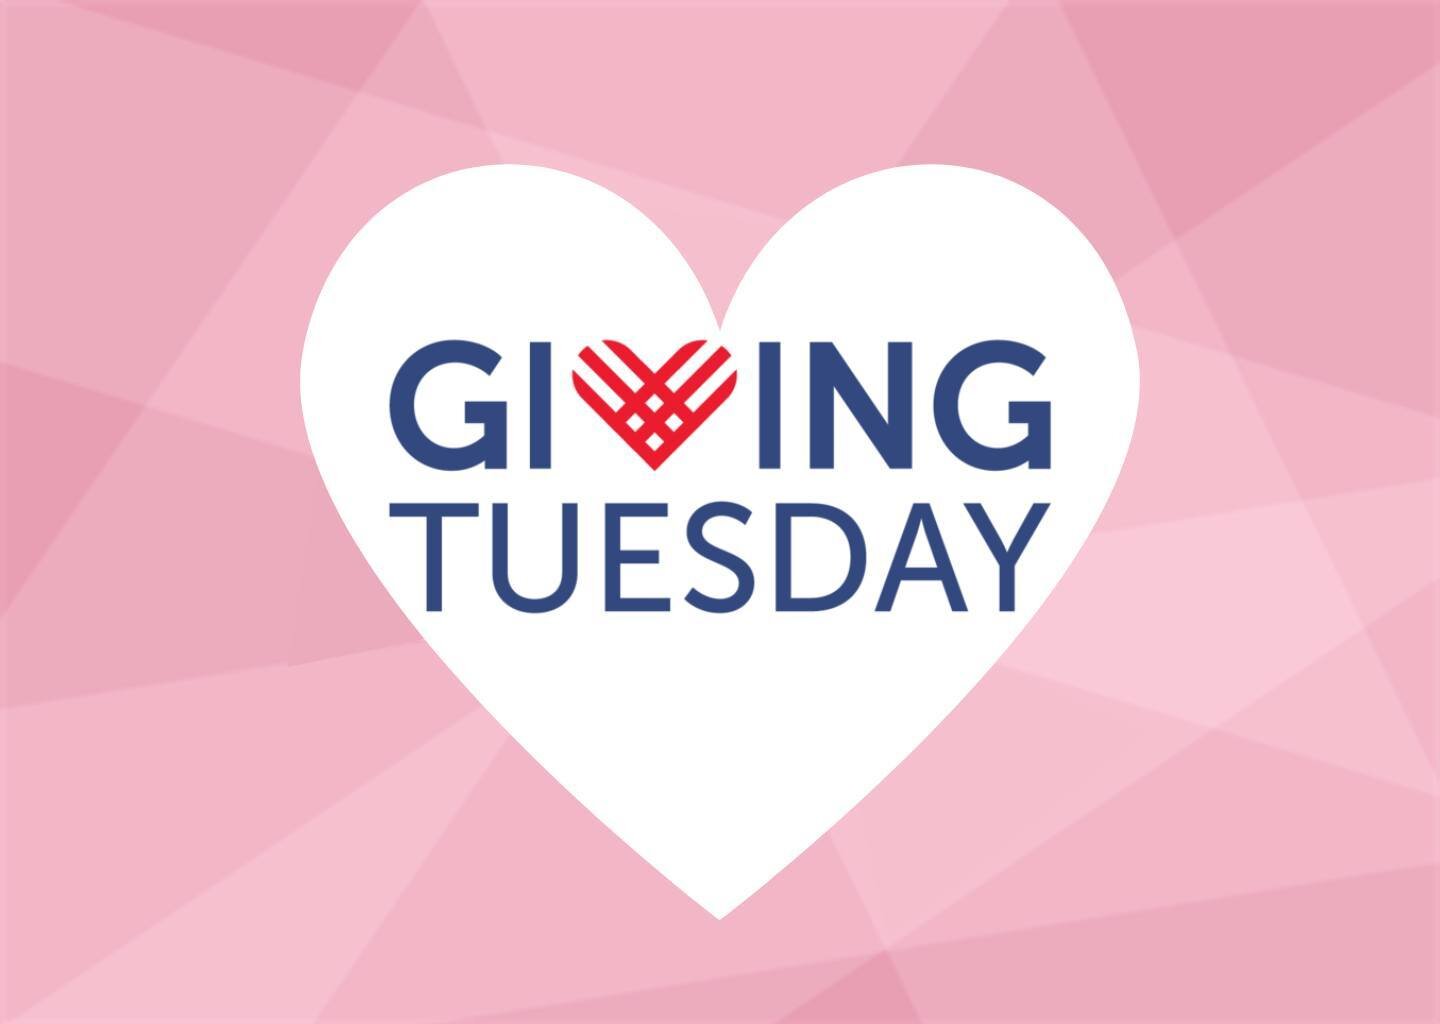 Today is #GivingTuesday. Consider visiting our website and checking out the list of non-profit organizations that are doing incredible work everyday with the help of their AmeriCorps members. They could use your support today and everyday. Find an or